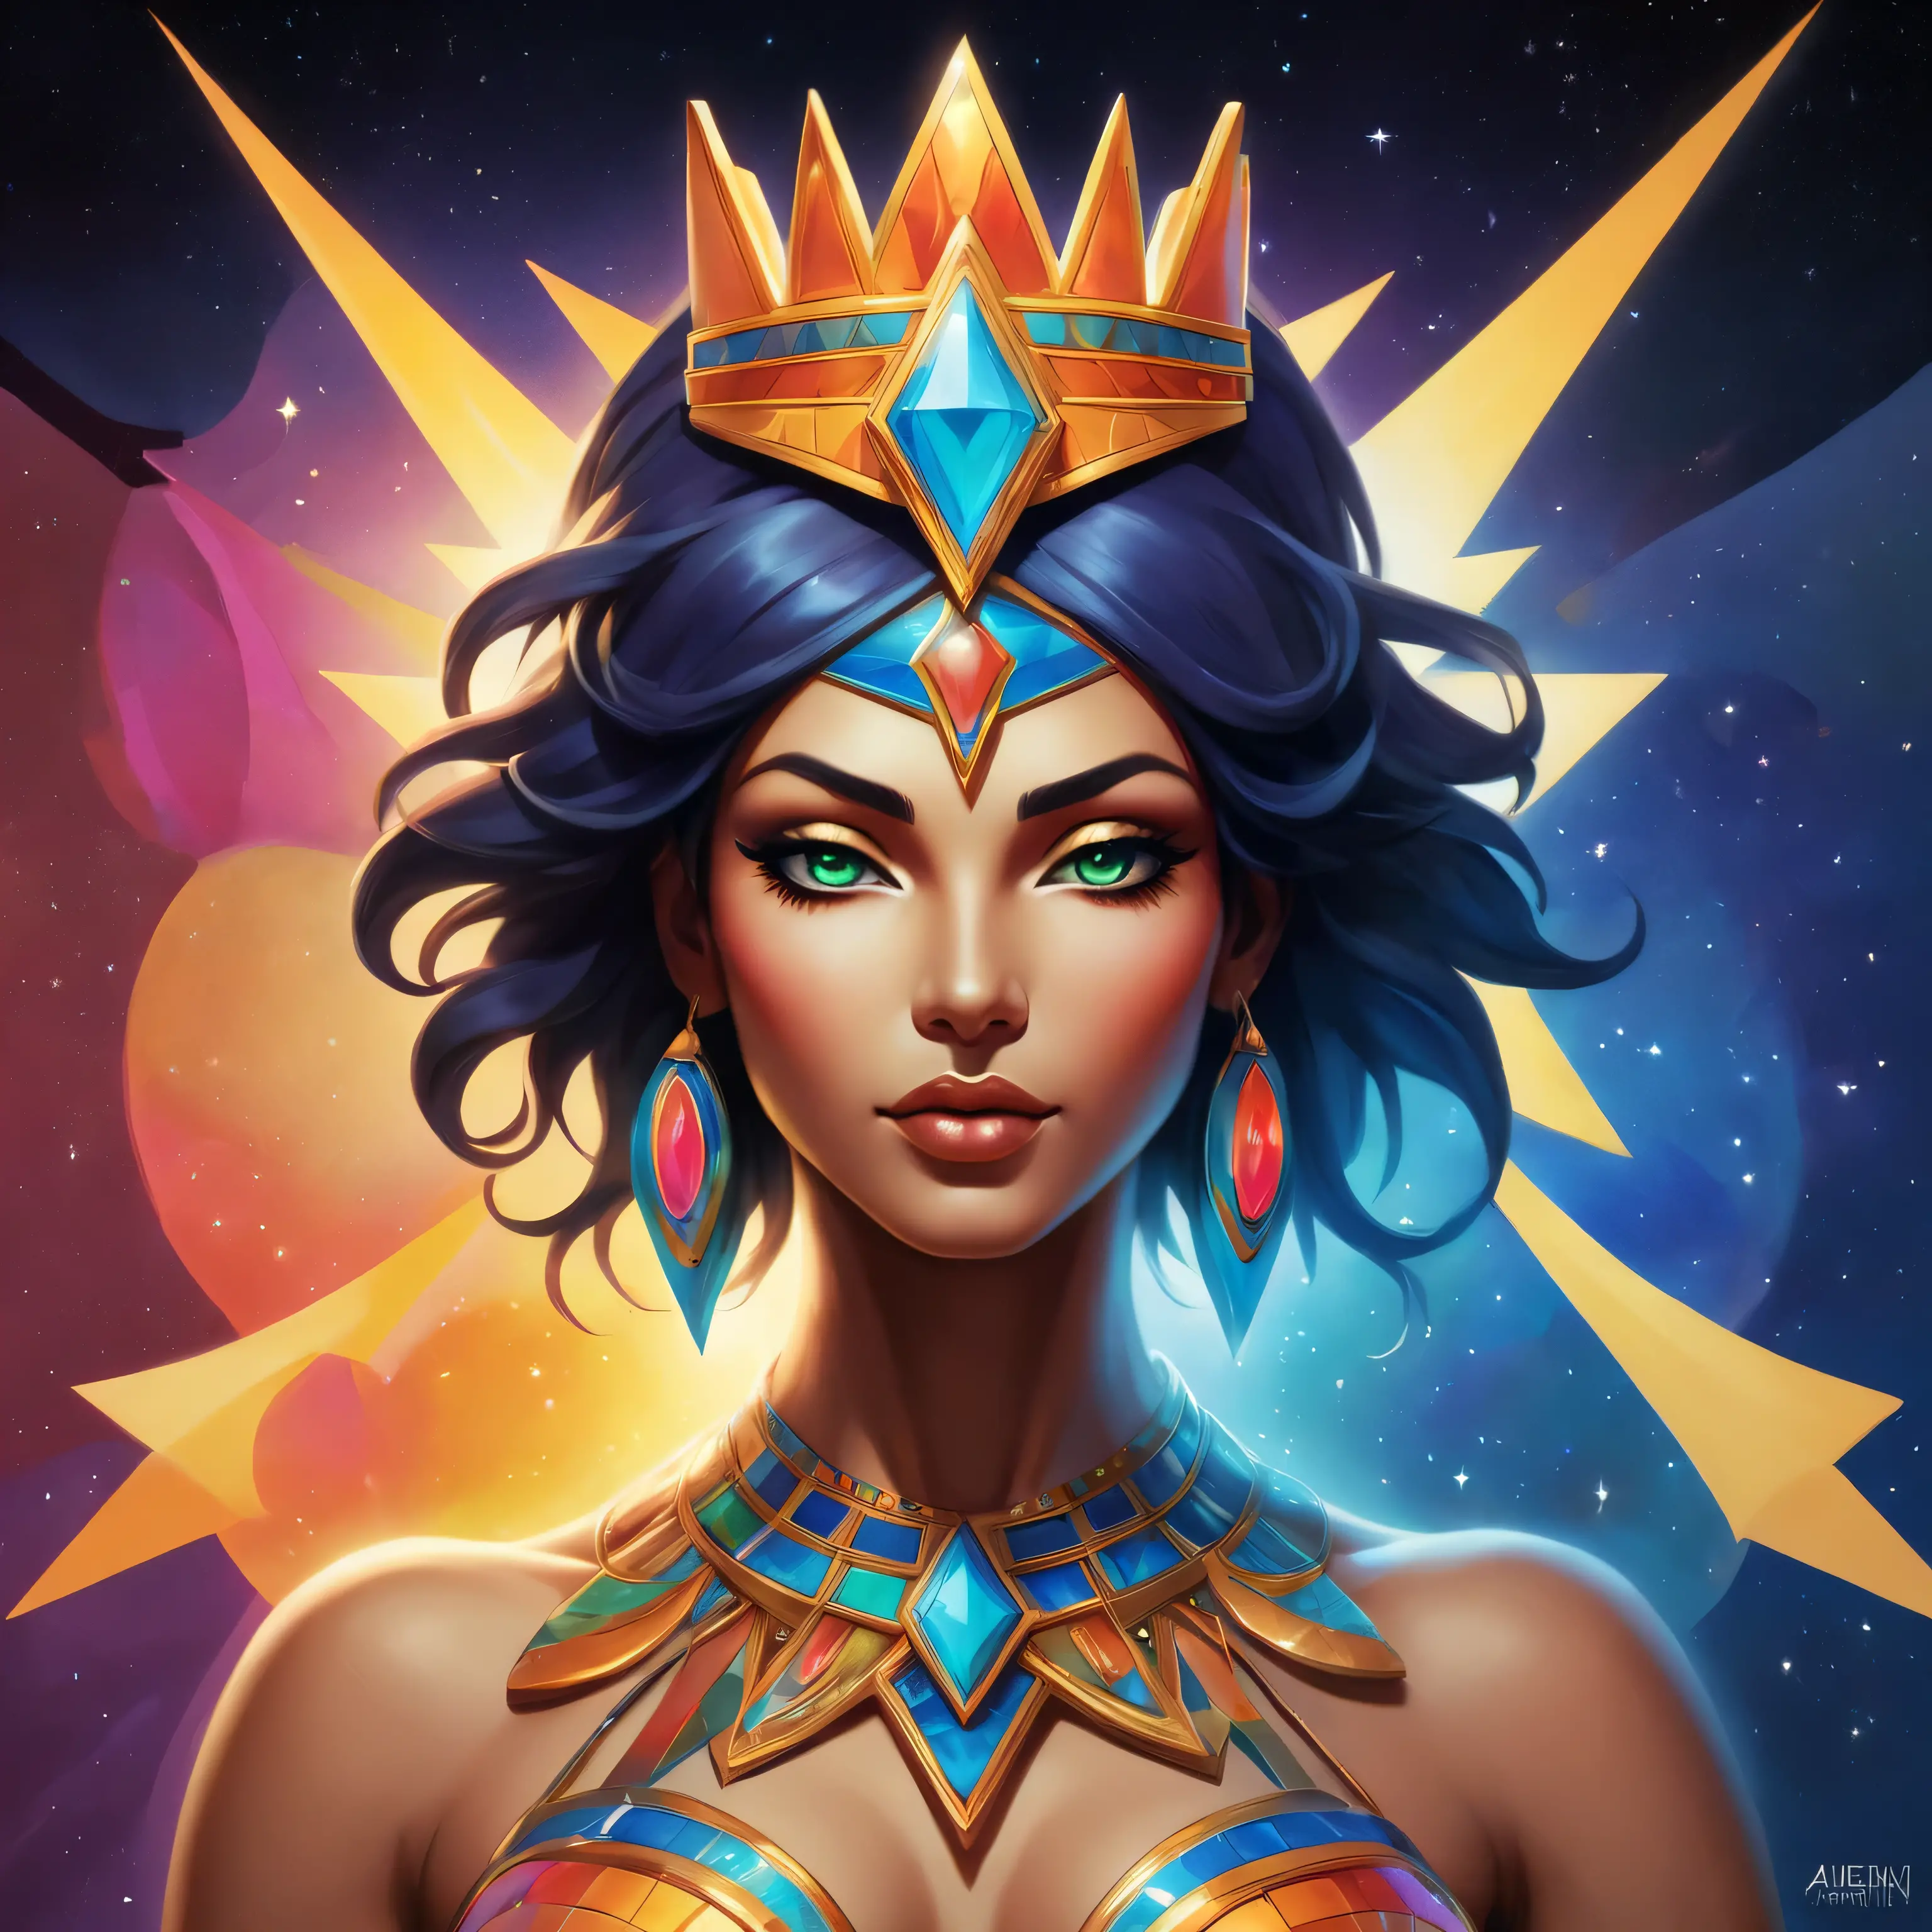 In the heart of the vibrant desert, the goddess Neith emerges as a radiant symbol of life, union, and transformation. Infused wi...